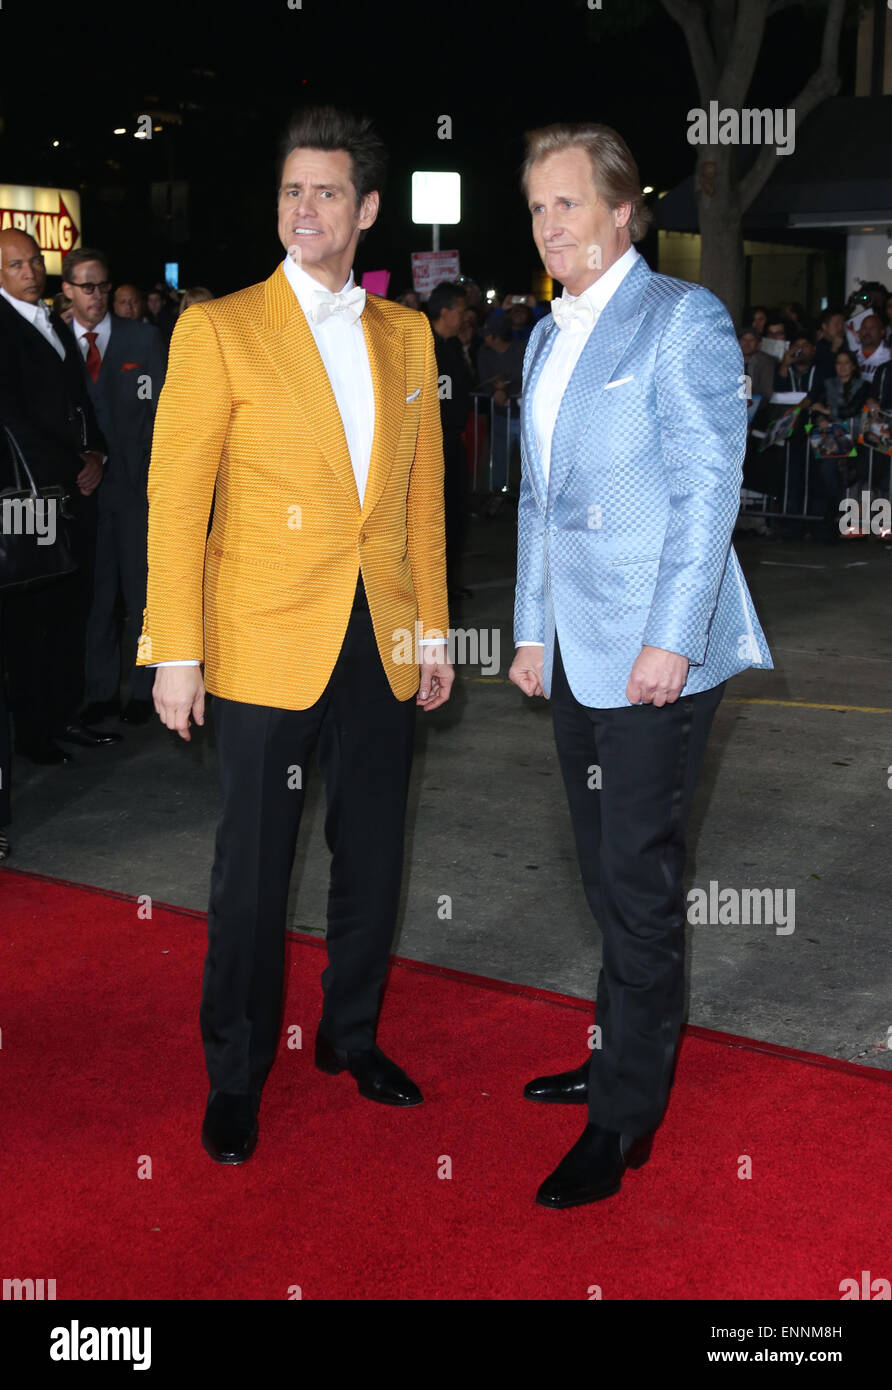 Dumb And Dumber To - Los Angeles Premiere  Featuring: Jim Carrey, Jeff Daniels Where: Westwood, California, United States When: 04 Nov 2014 Stock Photo